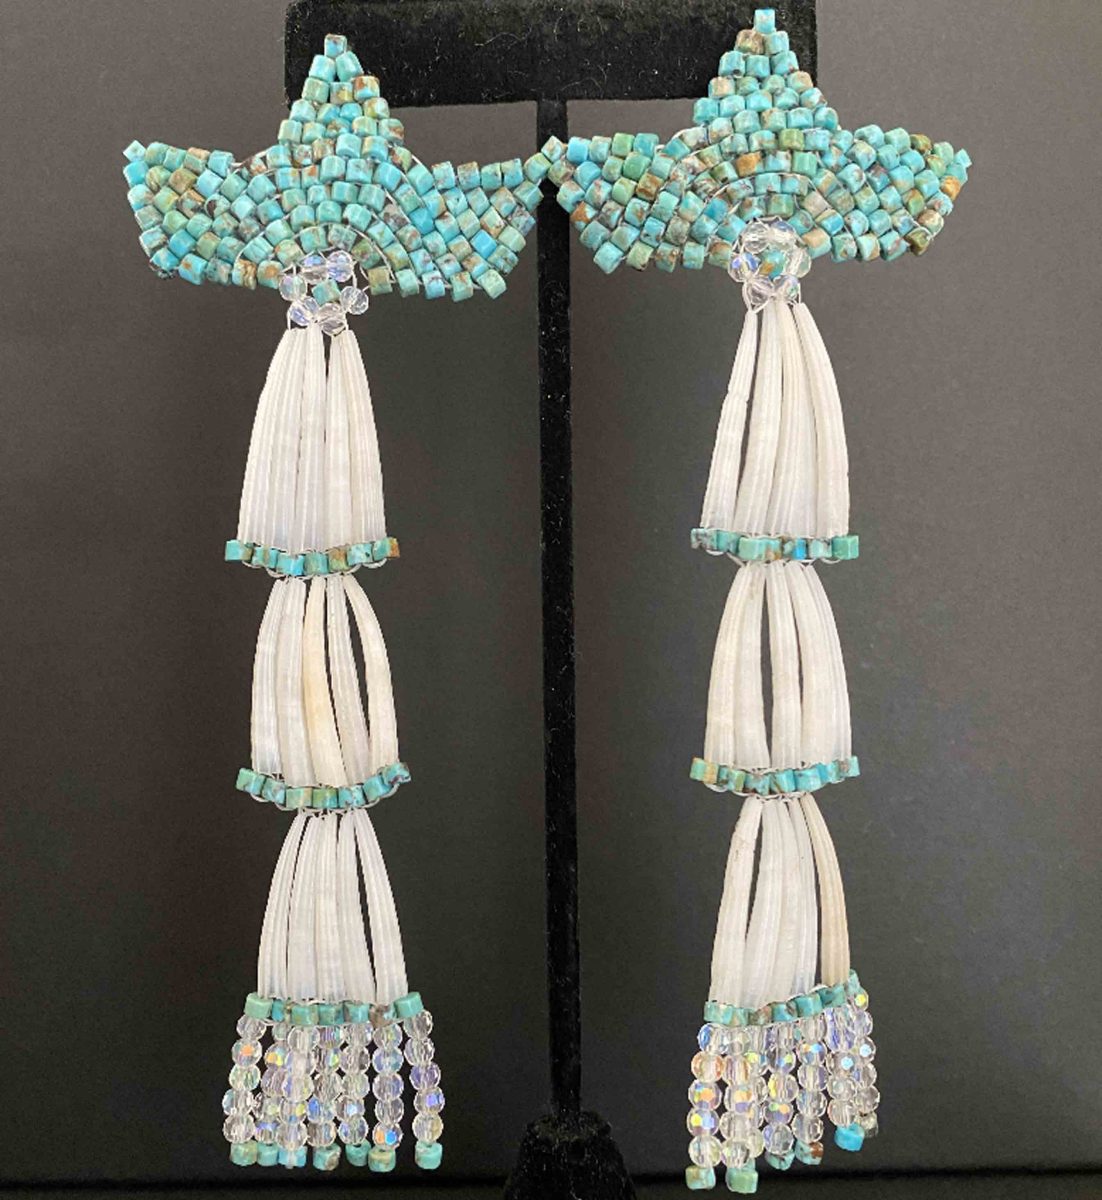 Native-American floral beadwork show at the Autry traces history, culture –  San Gabriel Valley Tribune